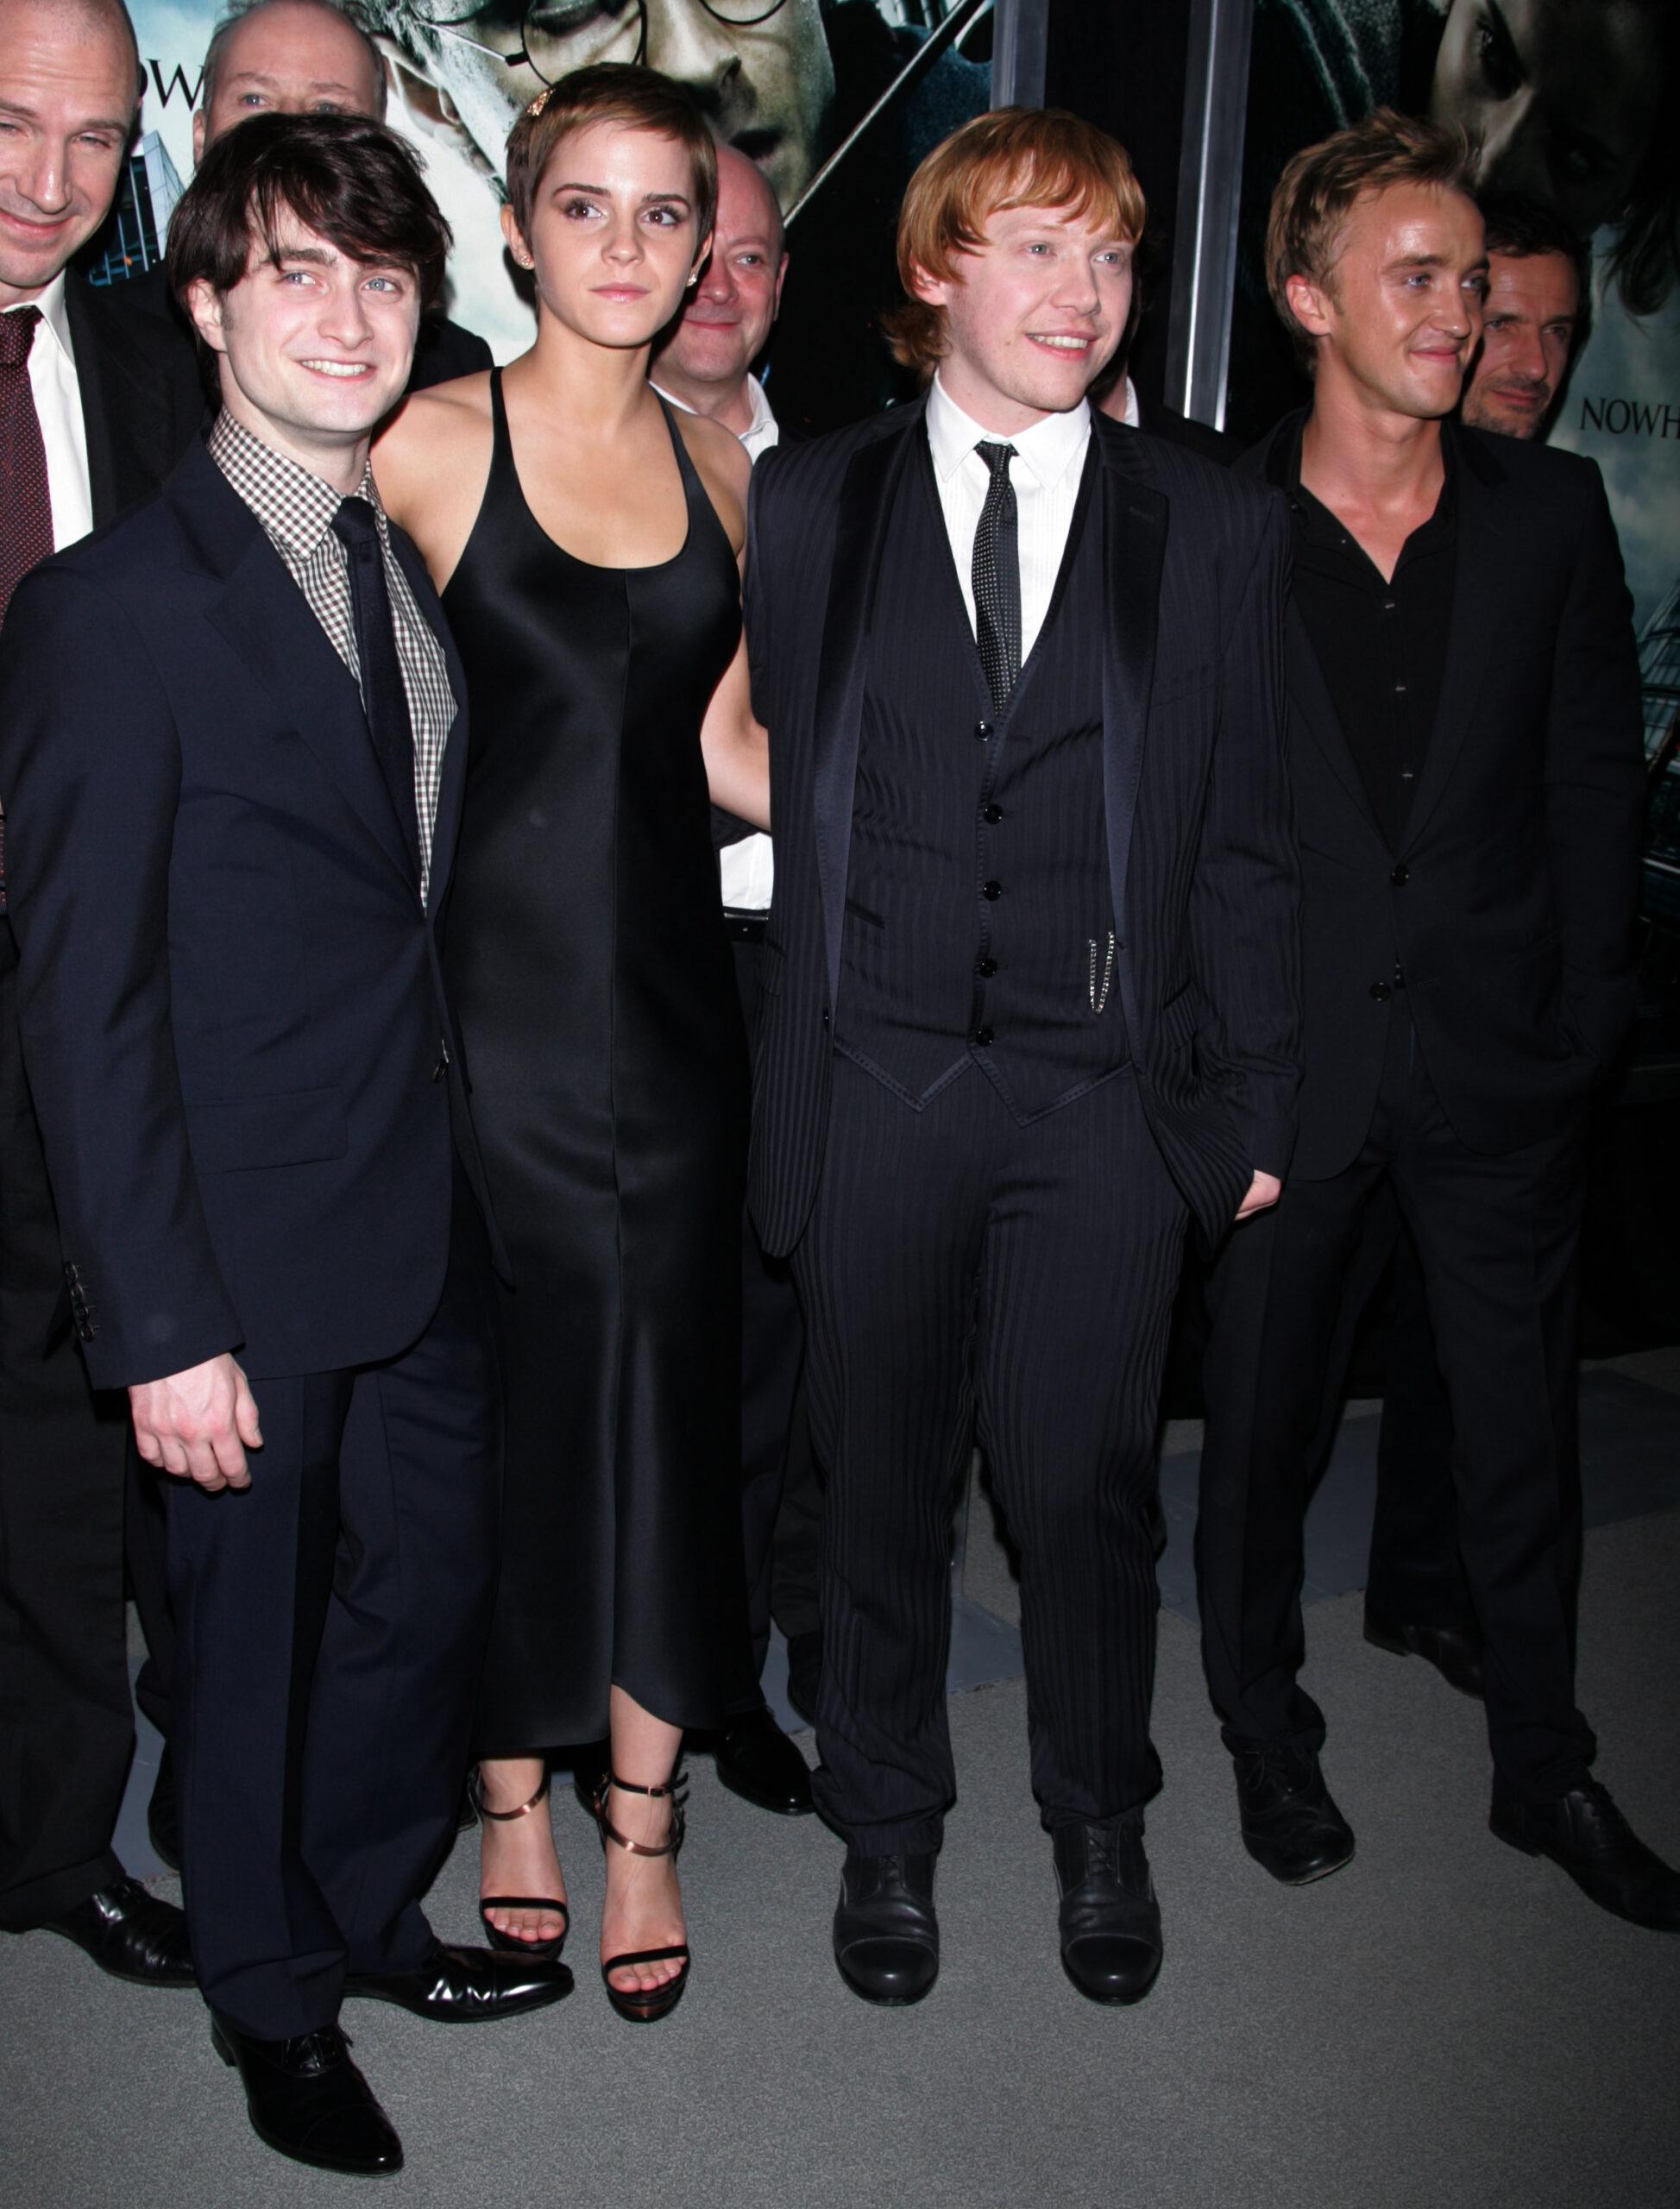 Daniel Radcliffe, Emma Watson, Rupert Grint and Tom Felton arrive for the Premiere of "Harry Potter and the Deathly Hallows Part I"  in New York